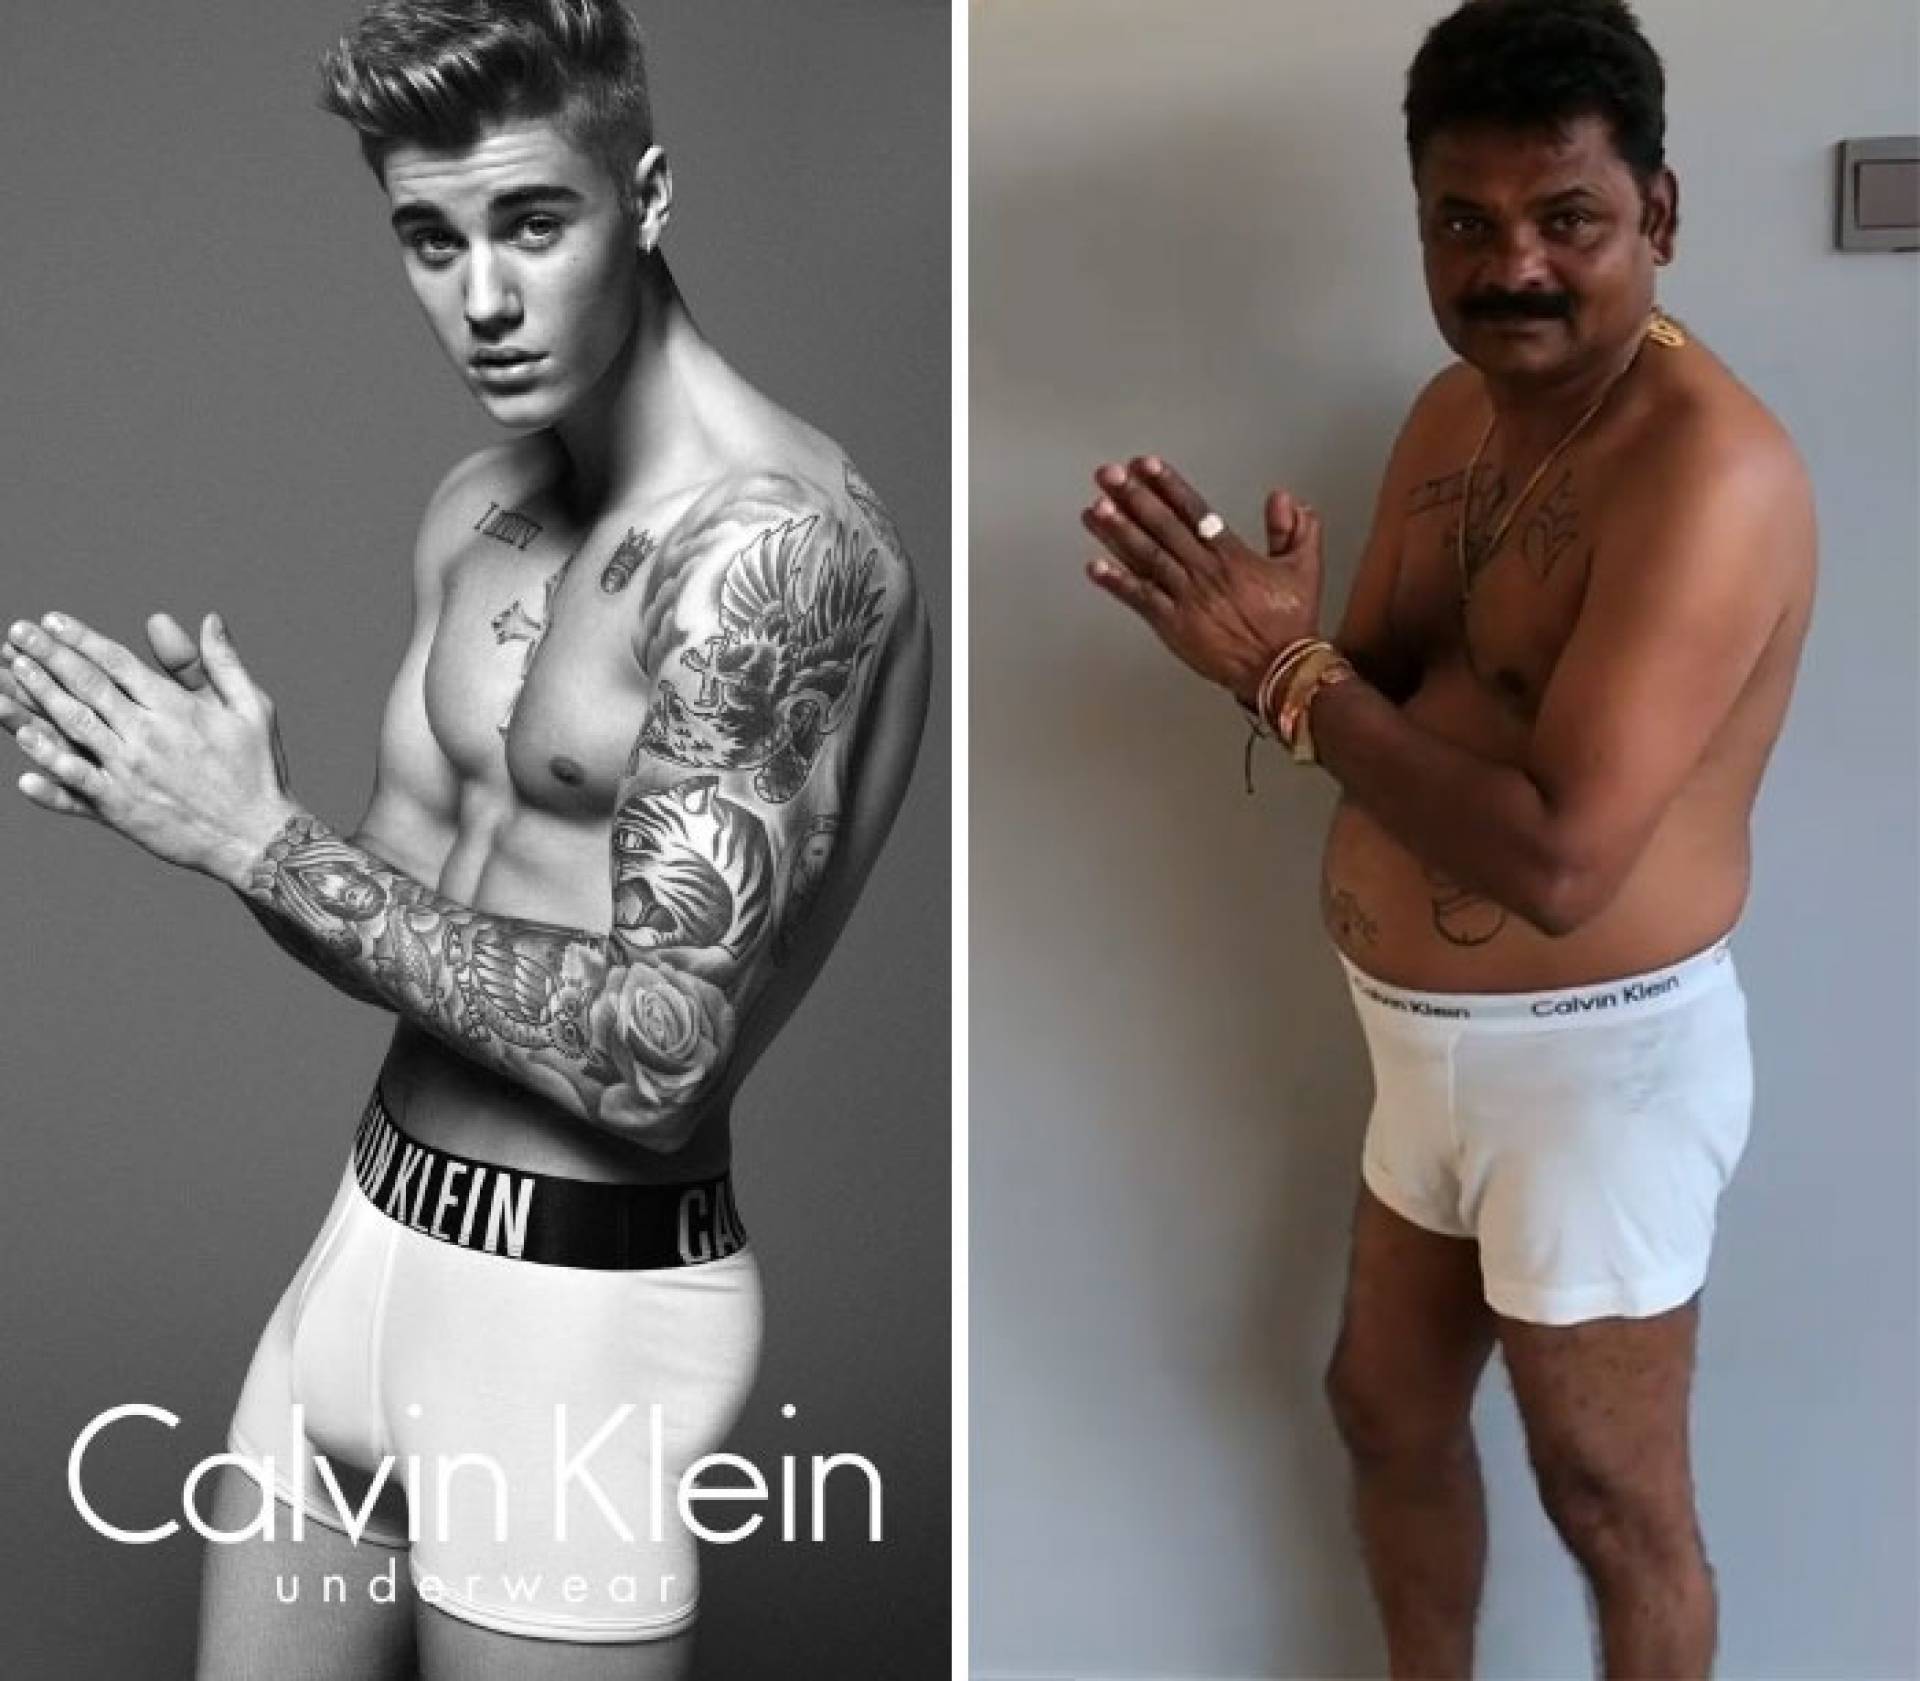 Meet This Indian Guy Who Is Taking The Internet By Storm With His Hilarious Celebrity Recreations